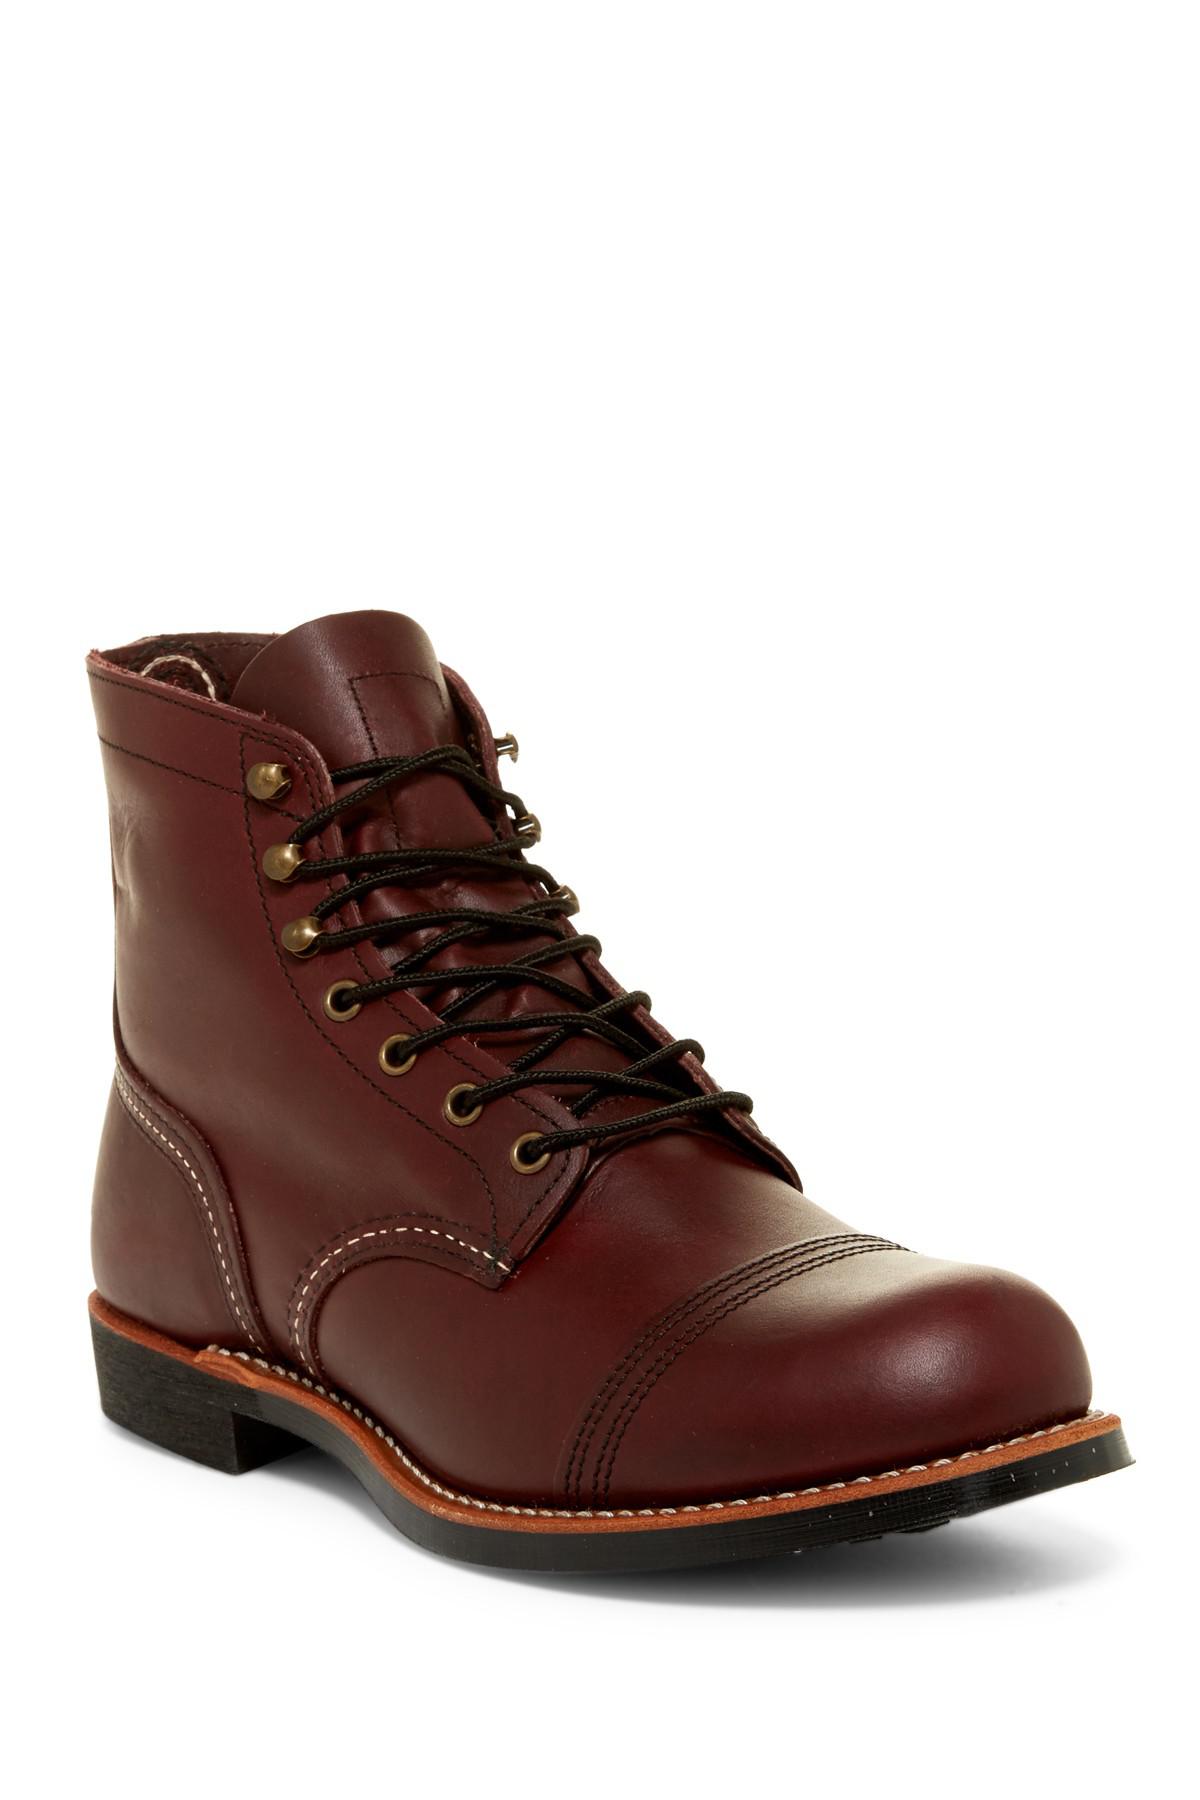 red wing factory 2nds